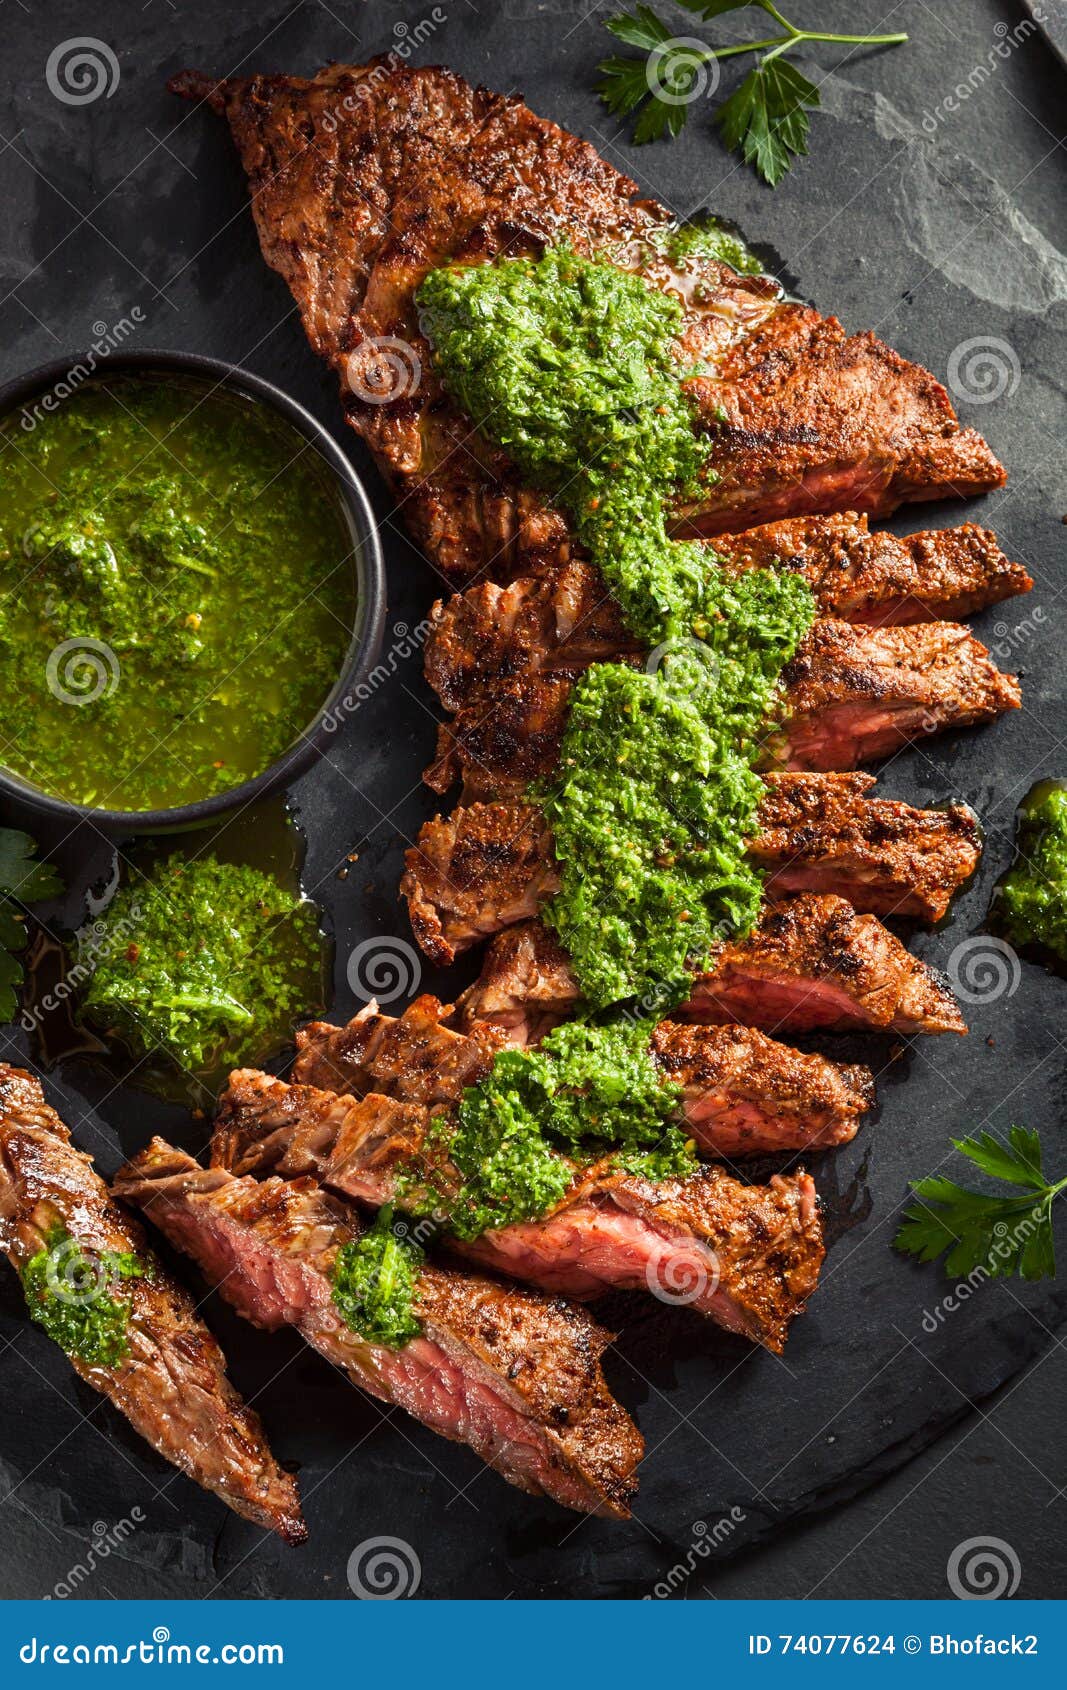 homemade cooked skirt steak with chimichurri